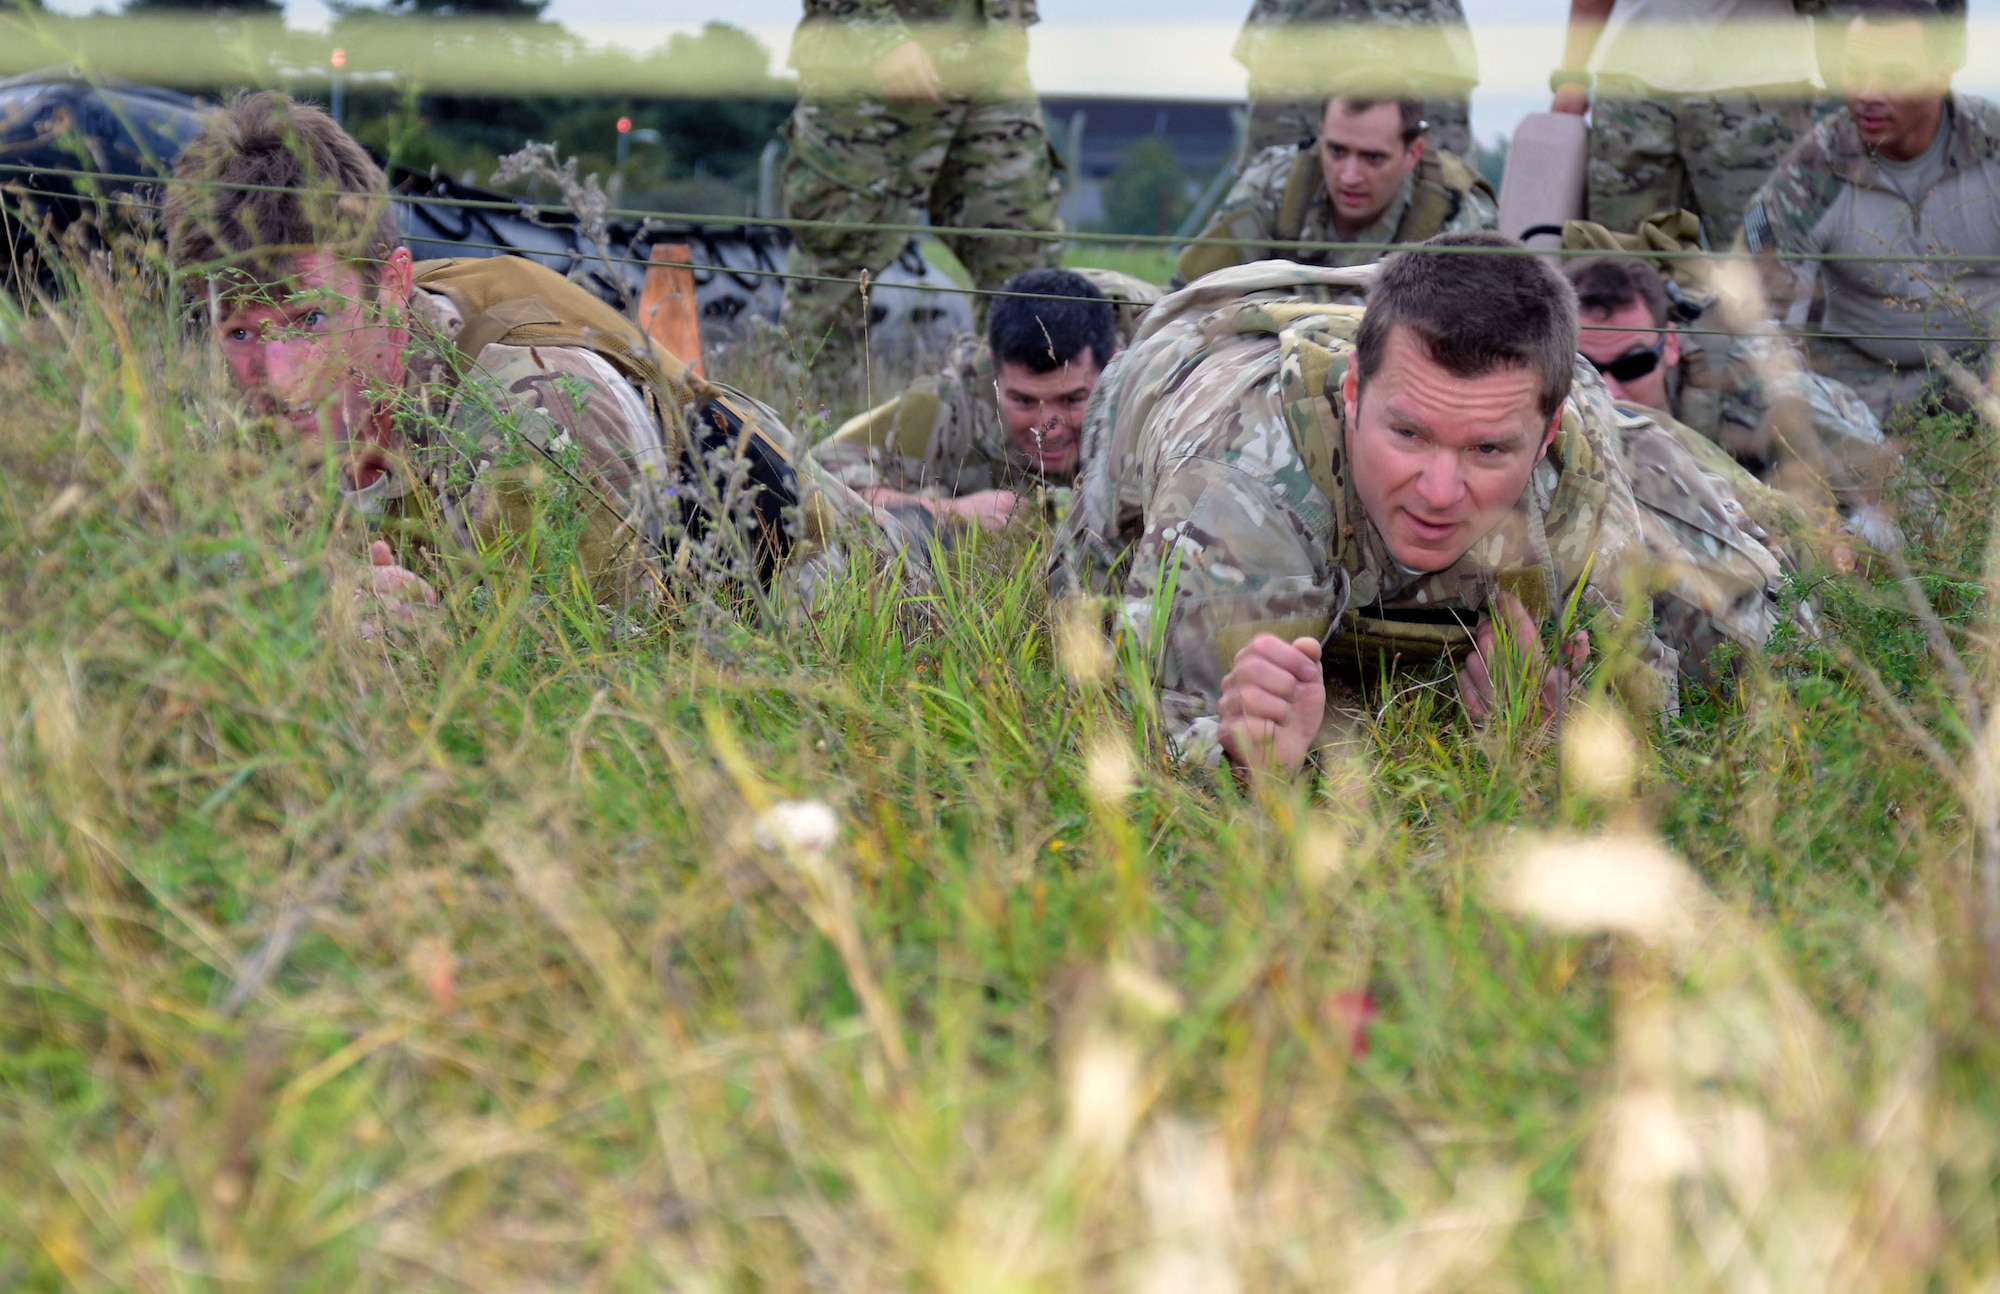 U.S. Air Force Master Sgt. Tim Garlock, right, 321st Special Tactics Squadron combat controller, and U.S. Air Force Staff Sgt. Alan Abraham, 321st STS combat controller, navigate a high- and low-crawl station during the Monster Mash Sept. 26, 2014, on RAF Mildenhall, England. The Monster Mash consisted of various events such as carrying an inflatable boat, marching with a 40-pound rucksack and a blind weapons assembly. A Monster Mash is a long-standing special tactics tradition which combines events designed to test strength, stamina and problem solving skills. (U.S. Air Force photo/Tech. Sgt. Stacia Zachary/Released)
